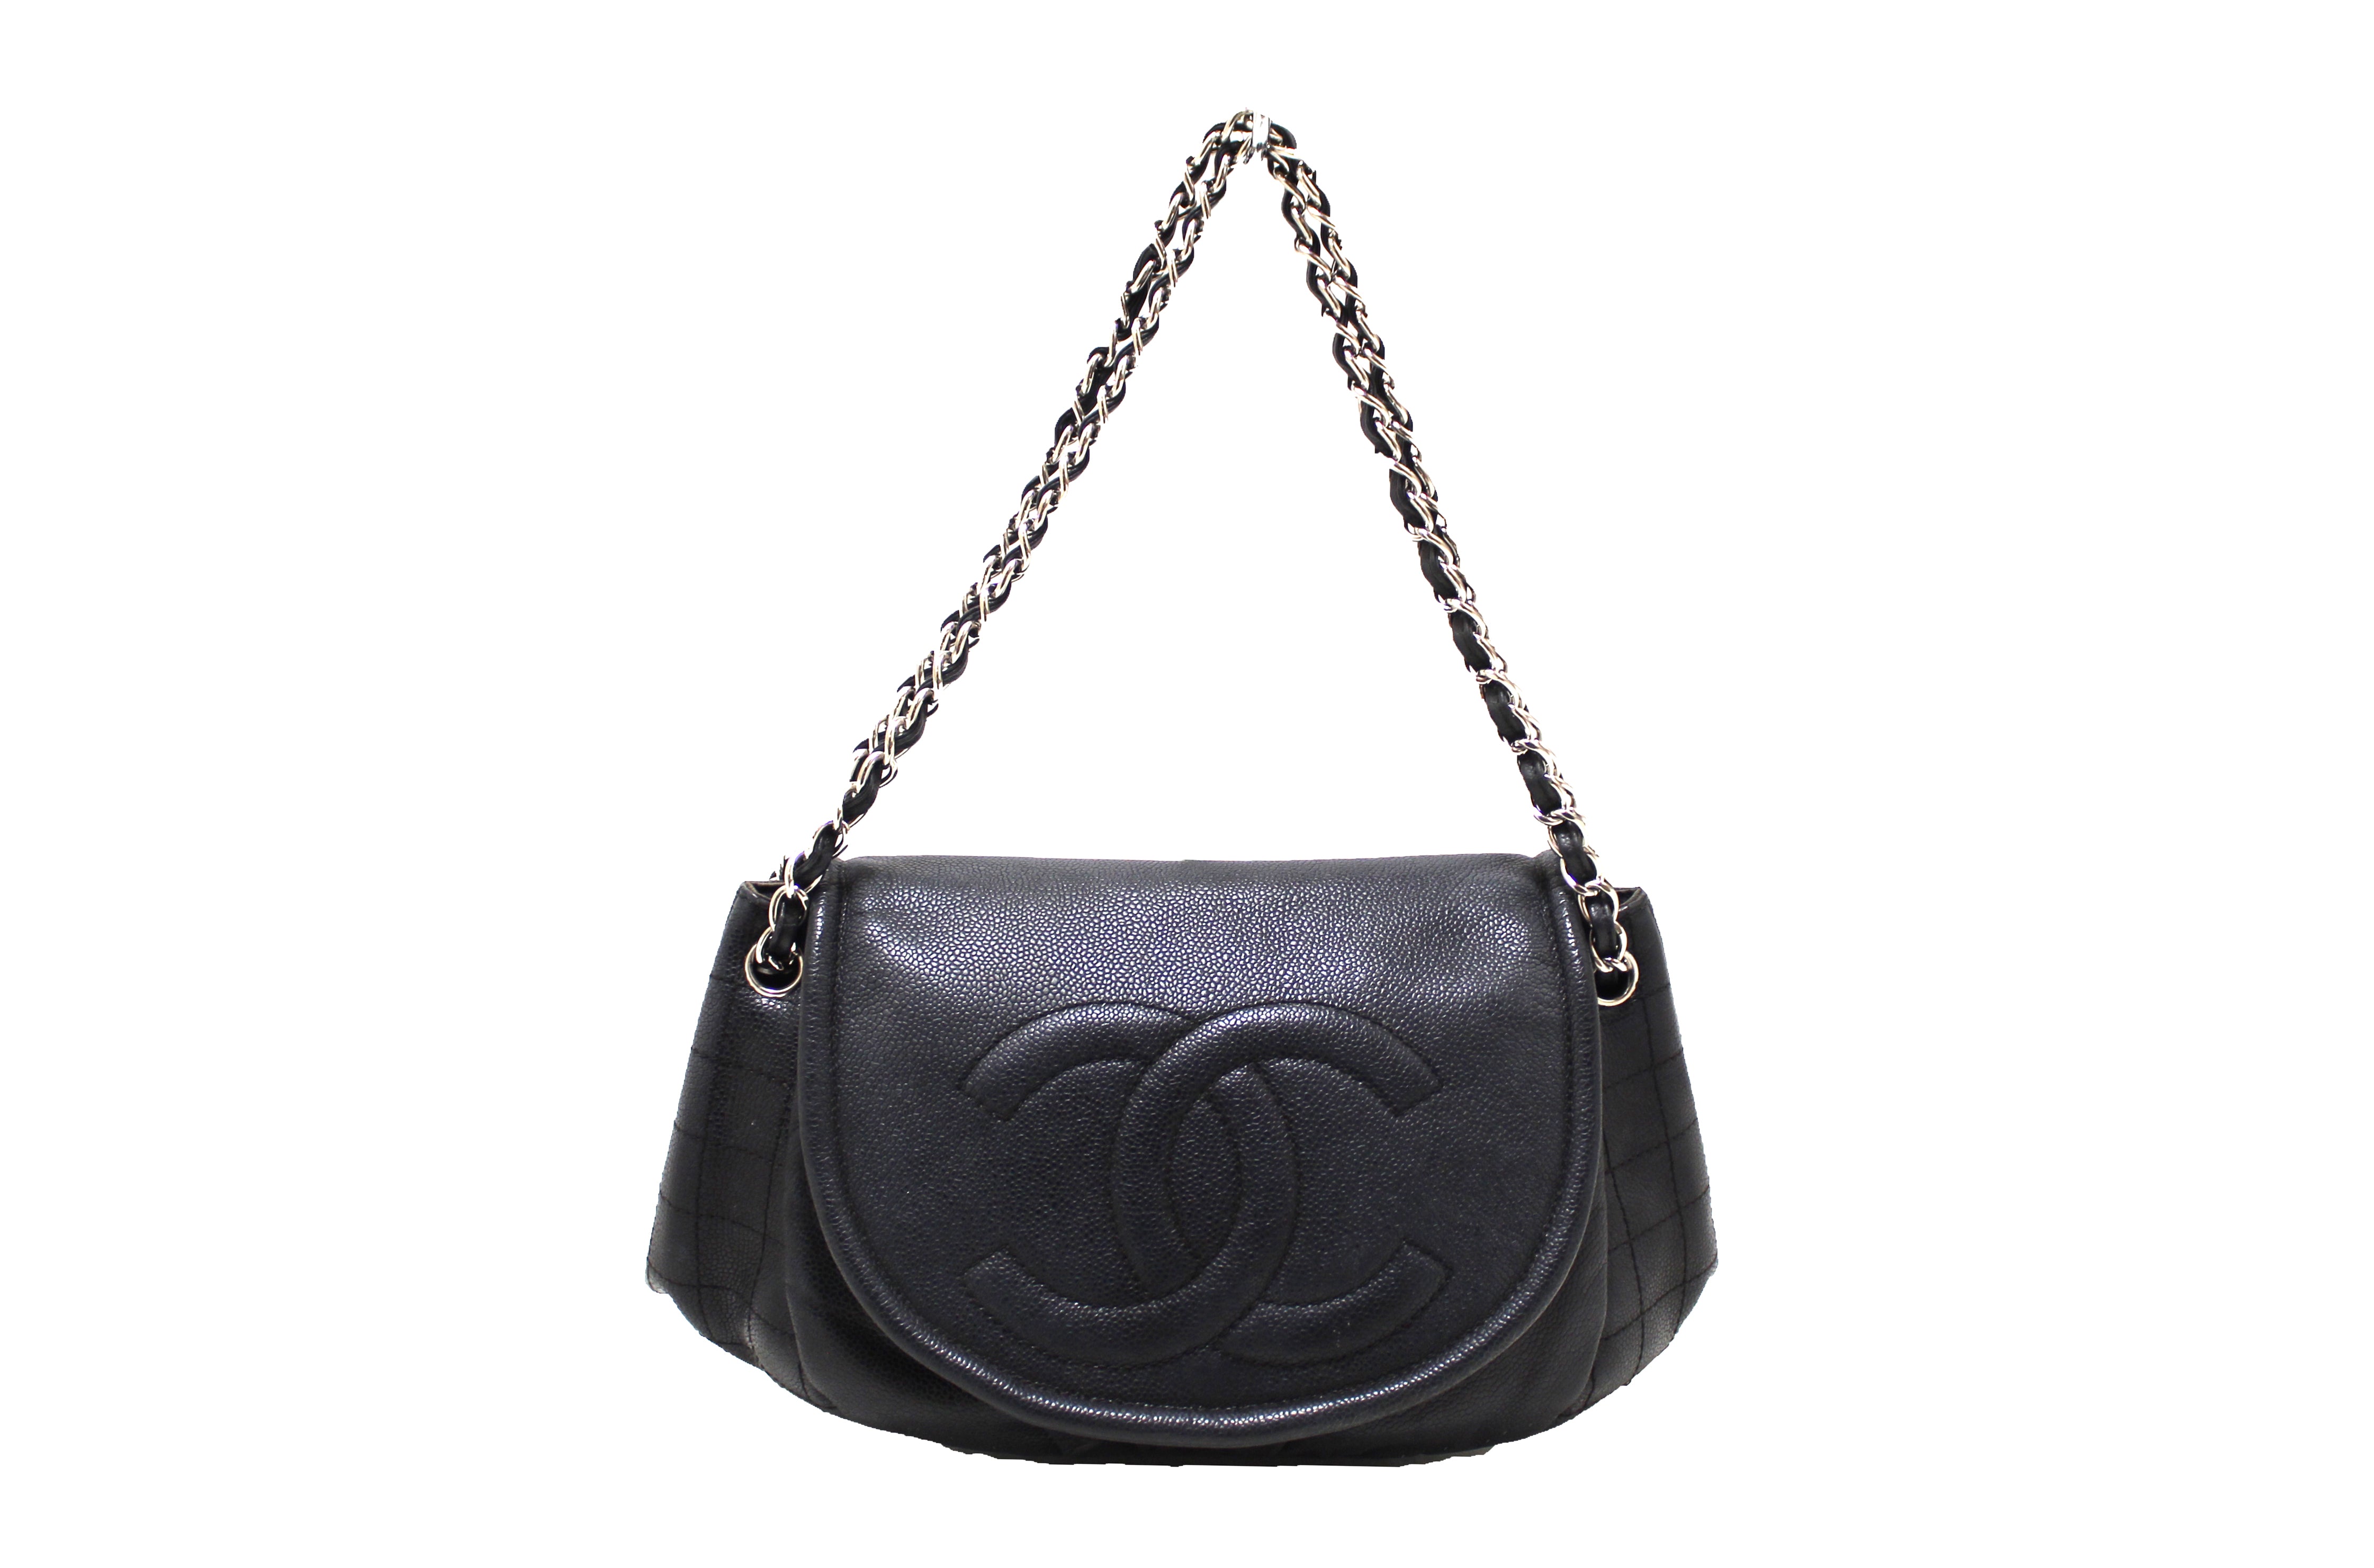 Authentic Chanel Black Caviar Leather Timeless Large Half Moon